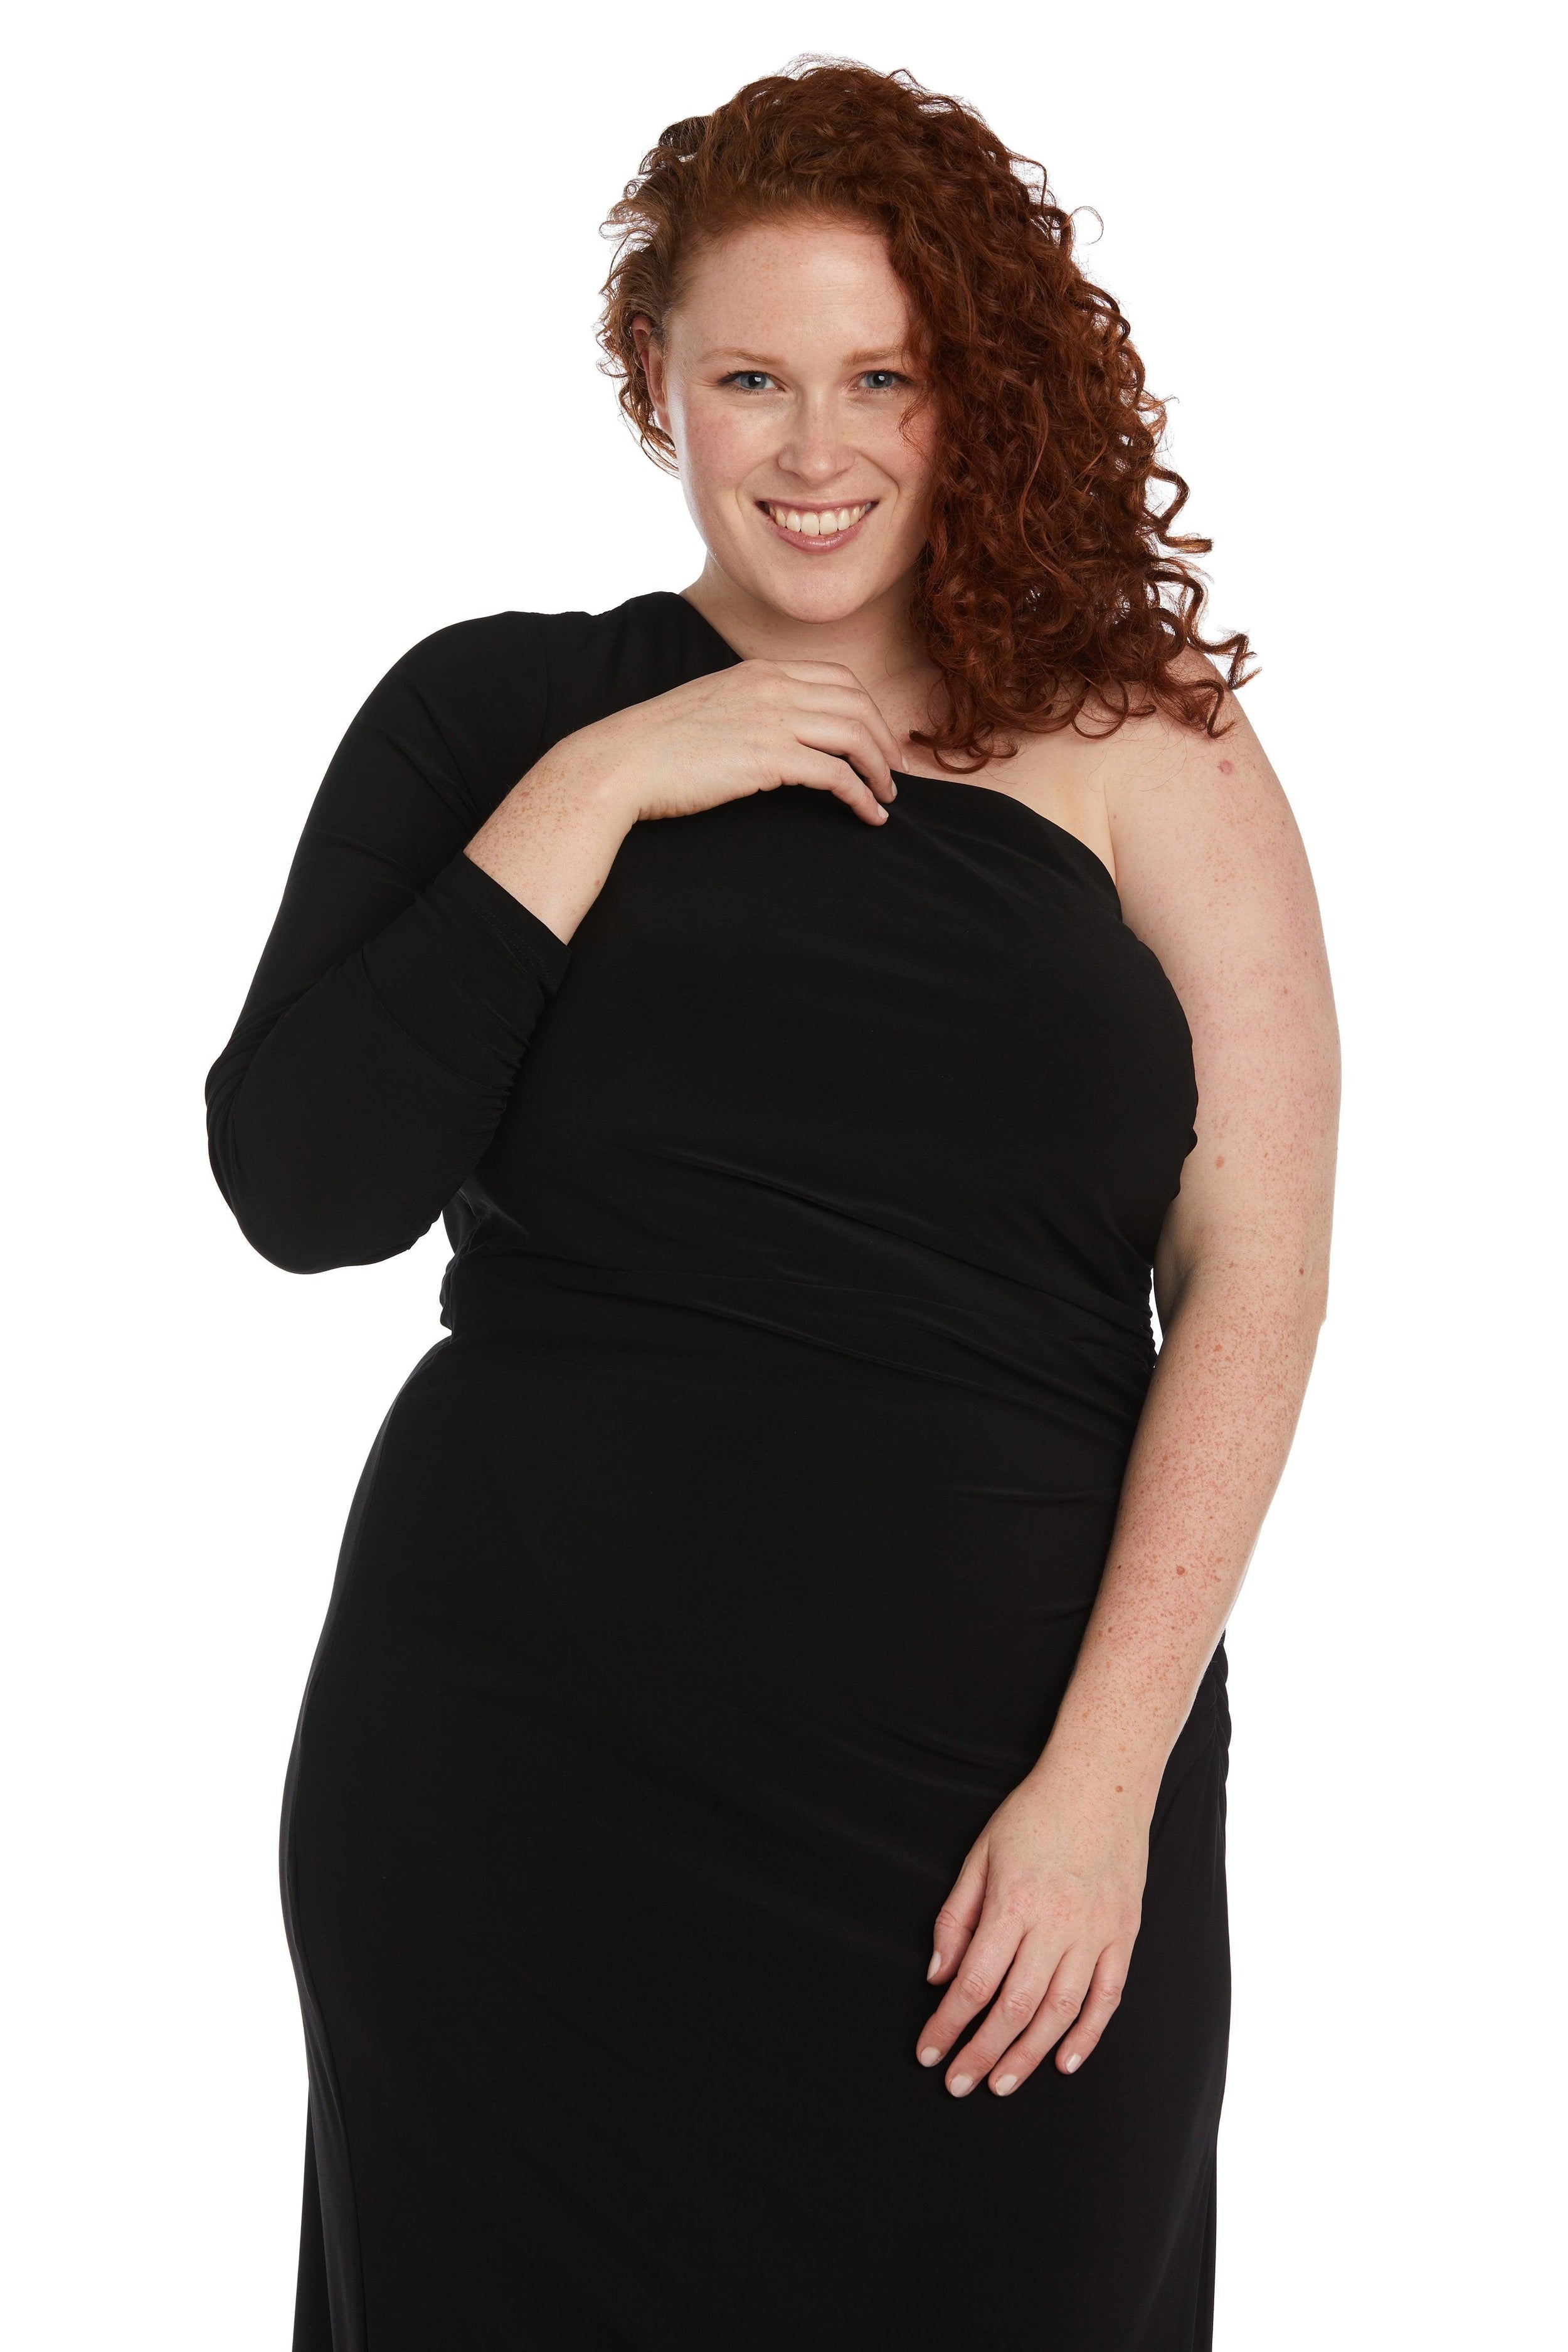 Nightway Long One Shoulder Plus Size Dress 22158W - The Dress Outlet